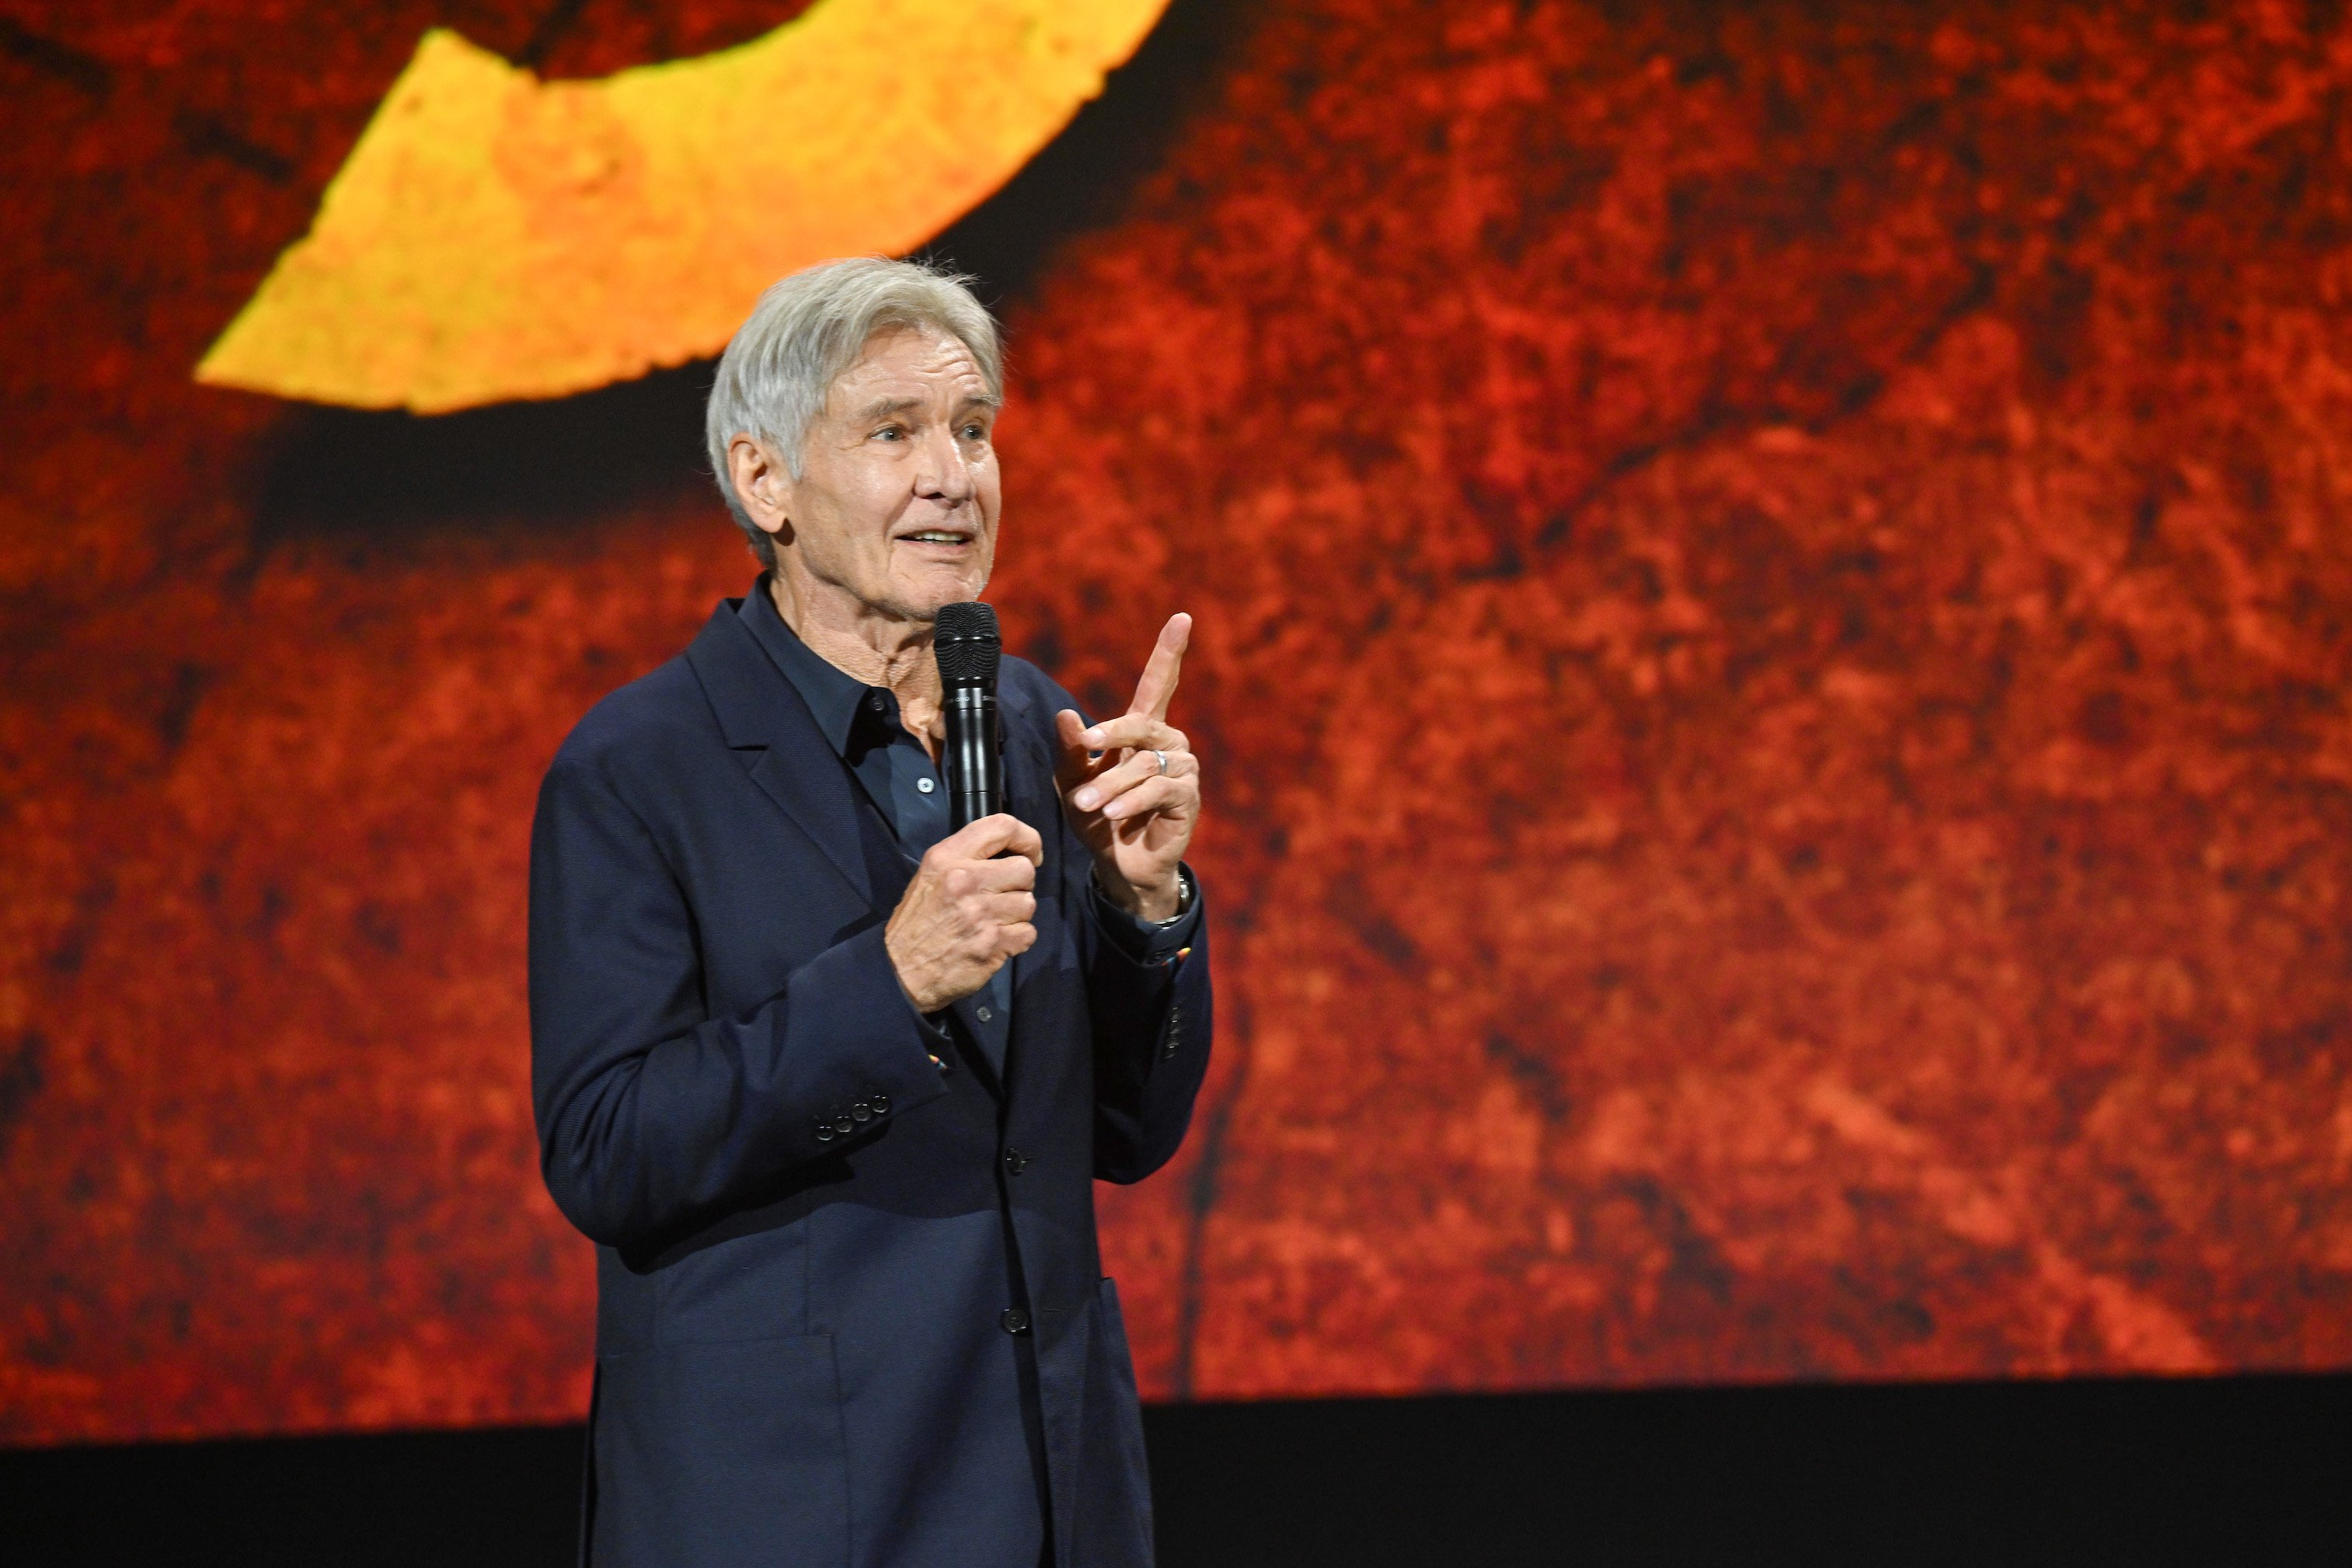 Harrison Ford speaks about Indiana Jones and the Dial of Destiny at the D23 Expo in Anaheim, CA